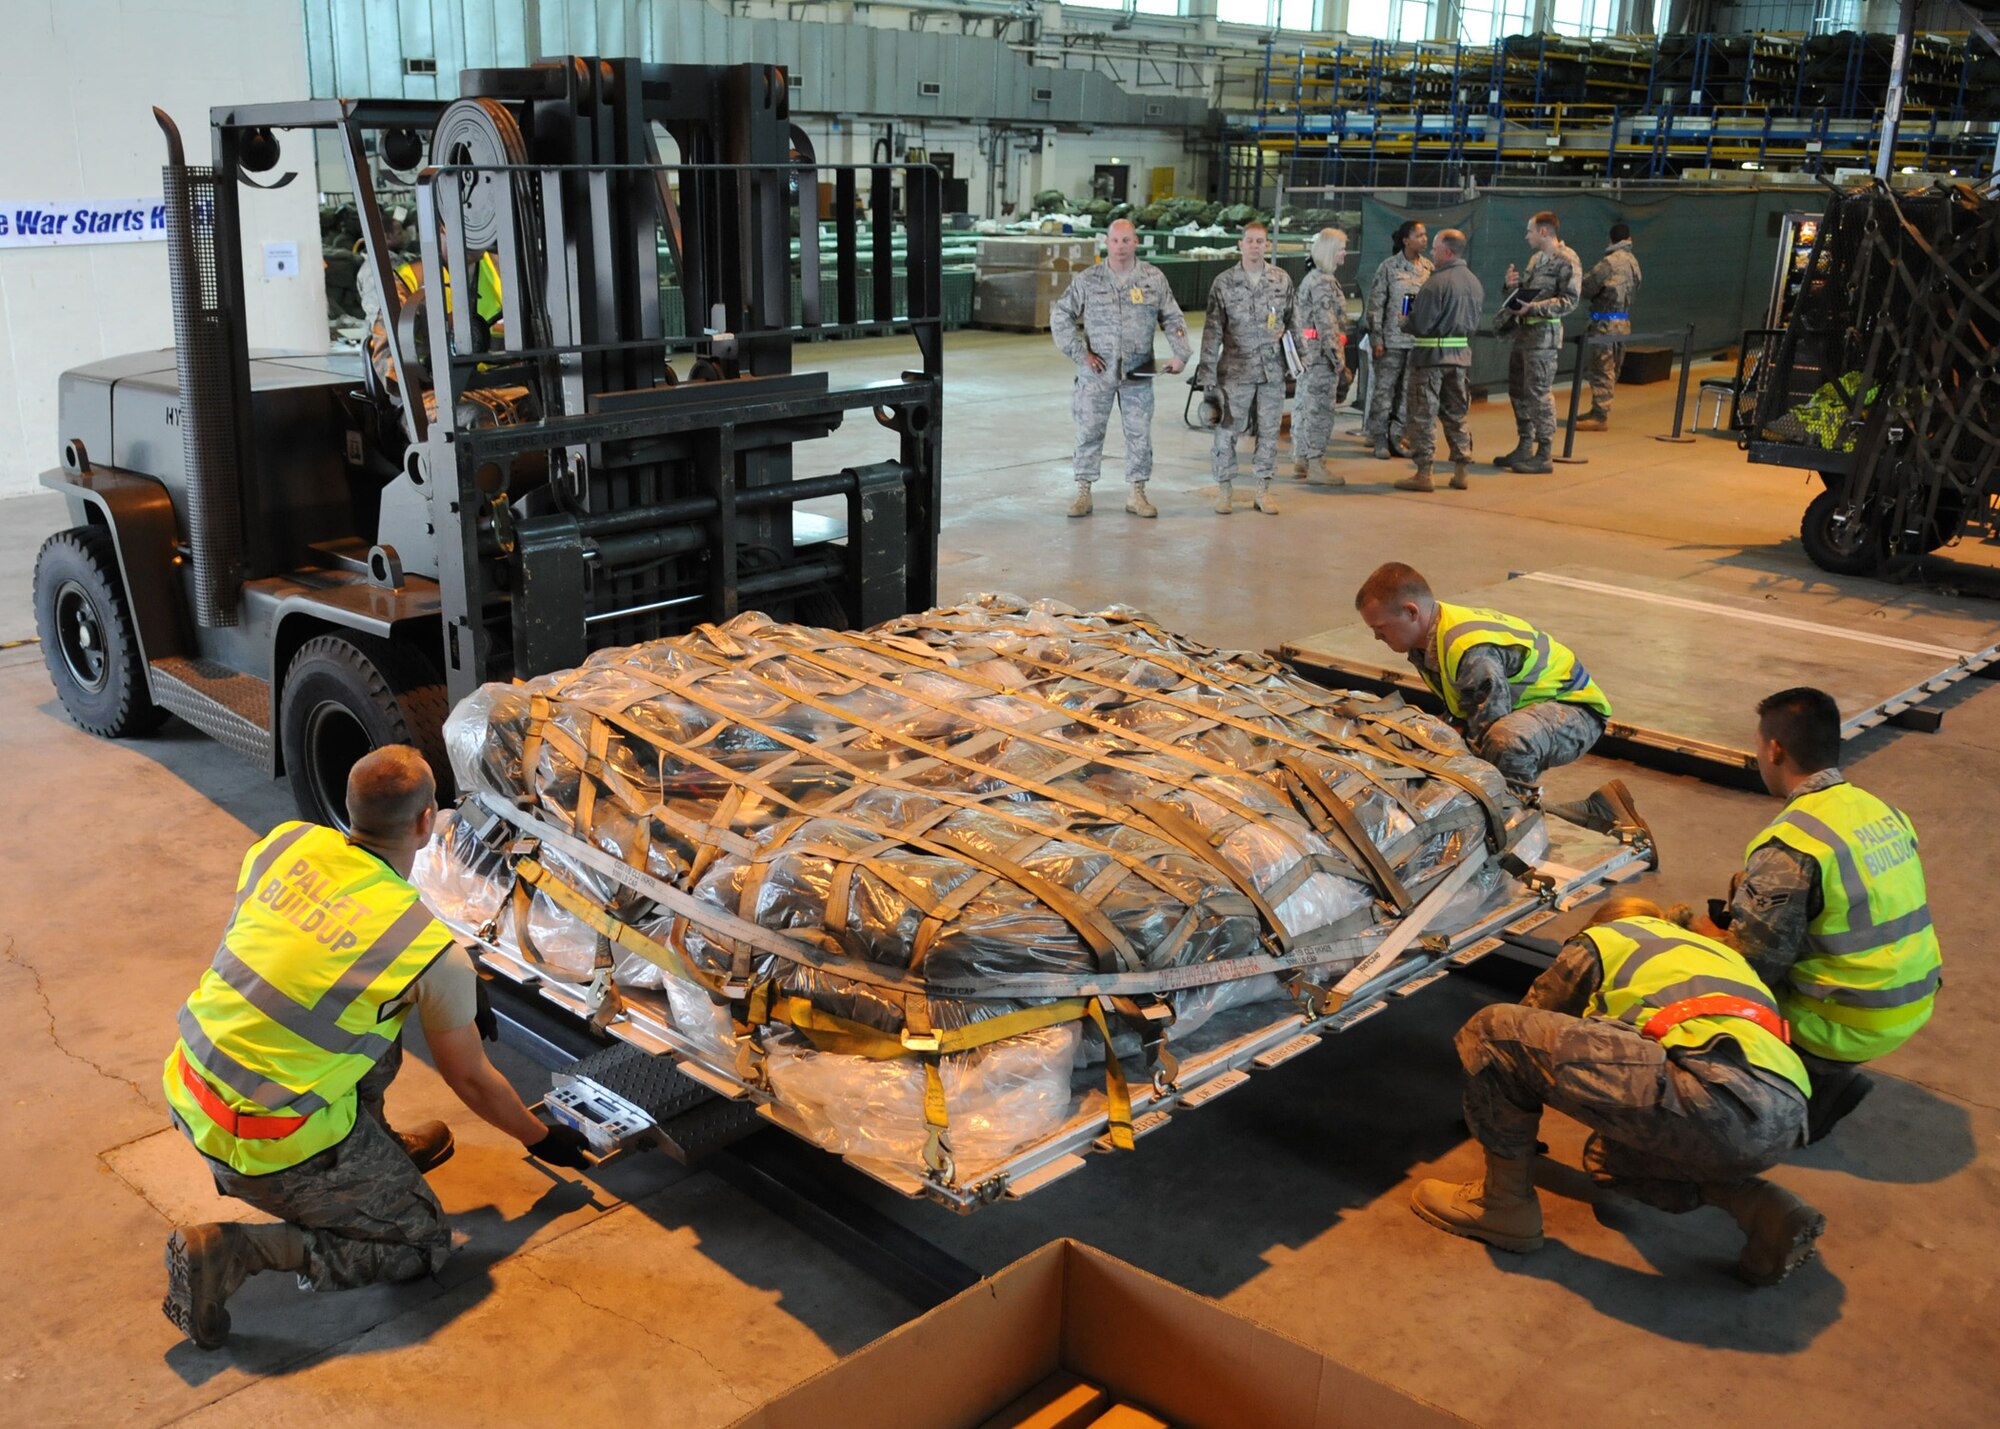 RAF MILDENHALL, England – Airmen with the 100th Logistics Readiness Squadron prepare to weigh a pallet with deployment gear at Building 550 during the Phase I portion of the Operational Readiness Inspection Oct. 7. Airmen practice for possible real deployment scenarios to ensure a smooth transition. (U.S. Air Force photo/ Staff Sgt. Jerry Fleshman)